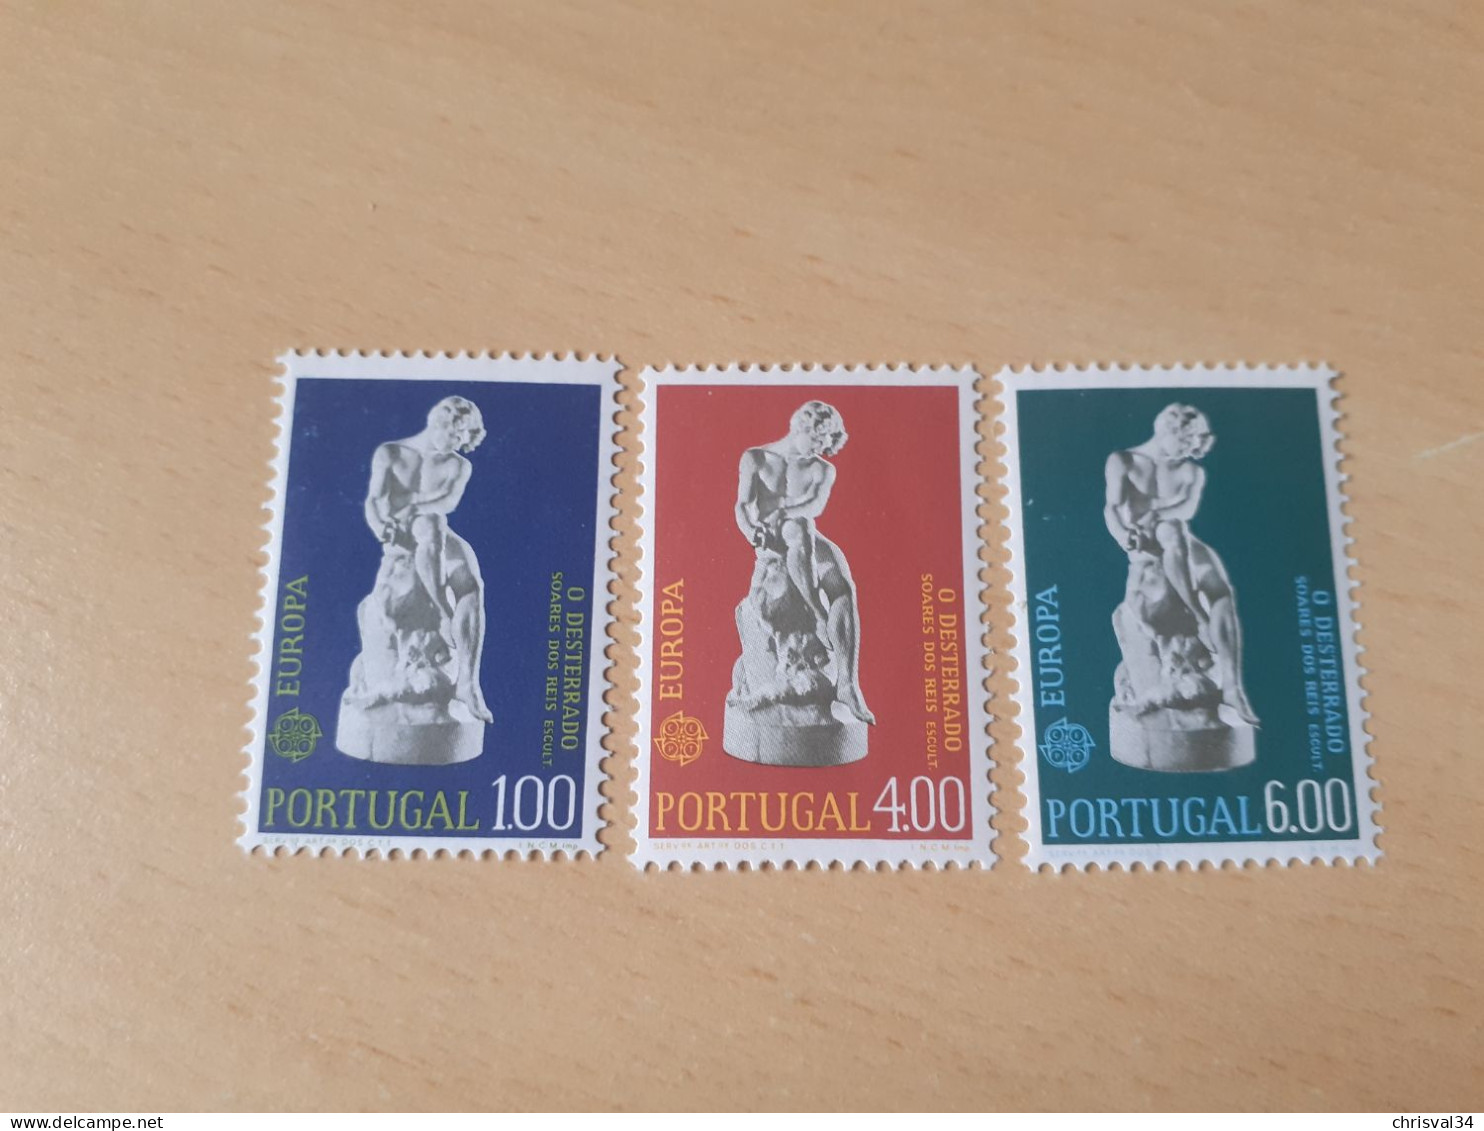 TIMBRES   PORTUGAL   EUROPA   1974   N  1211  A  1213   COTE  35,00  EUROS   NEUFS  LUXE** - 1974